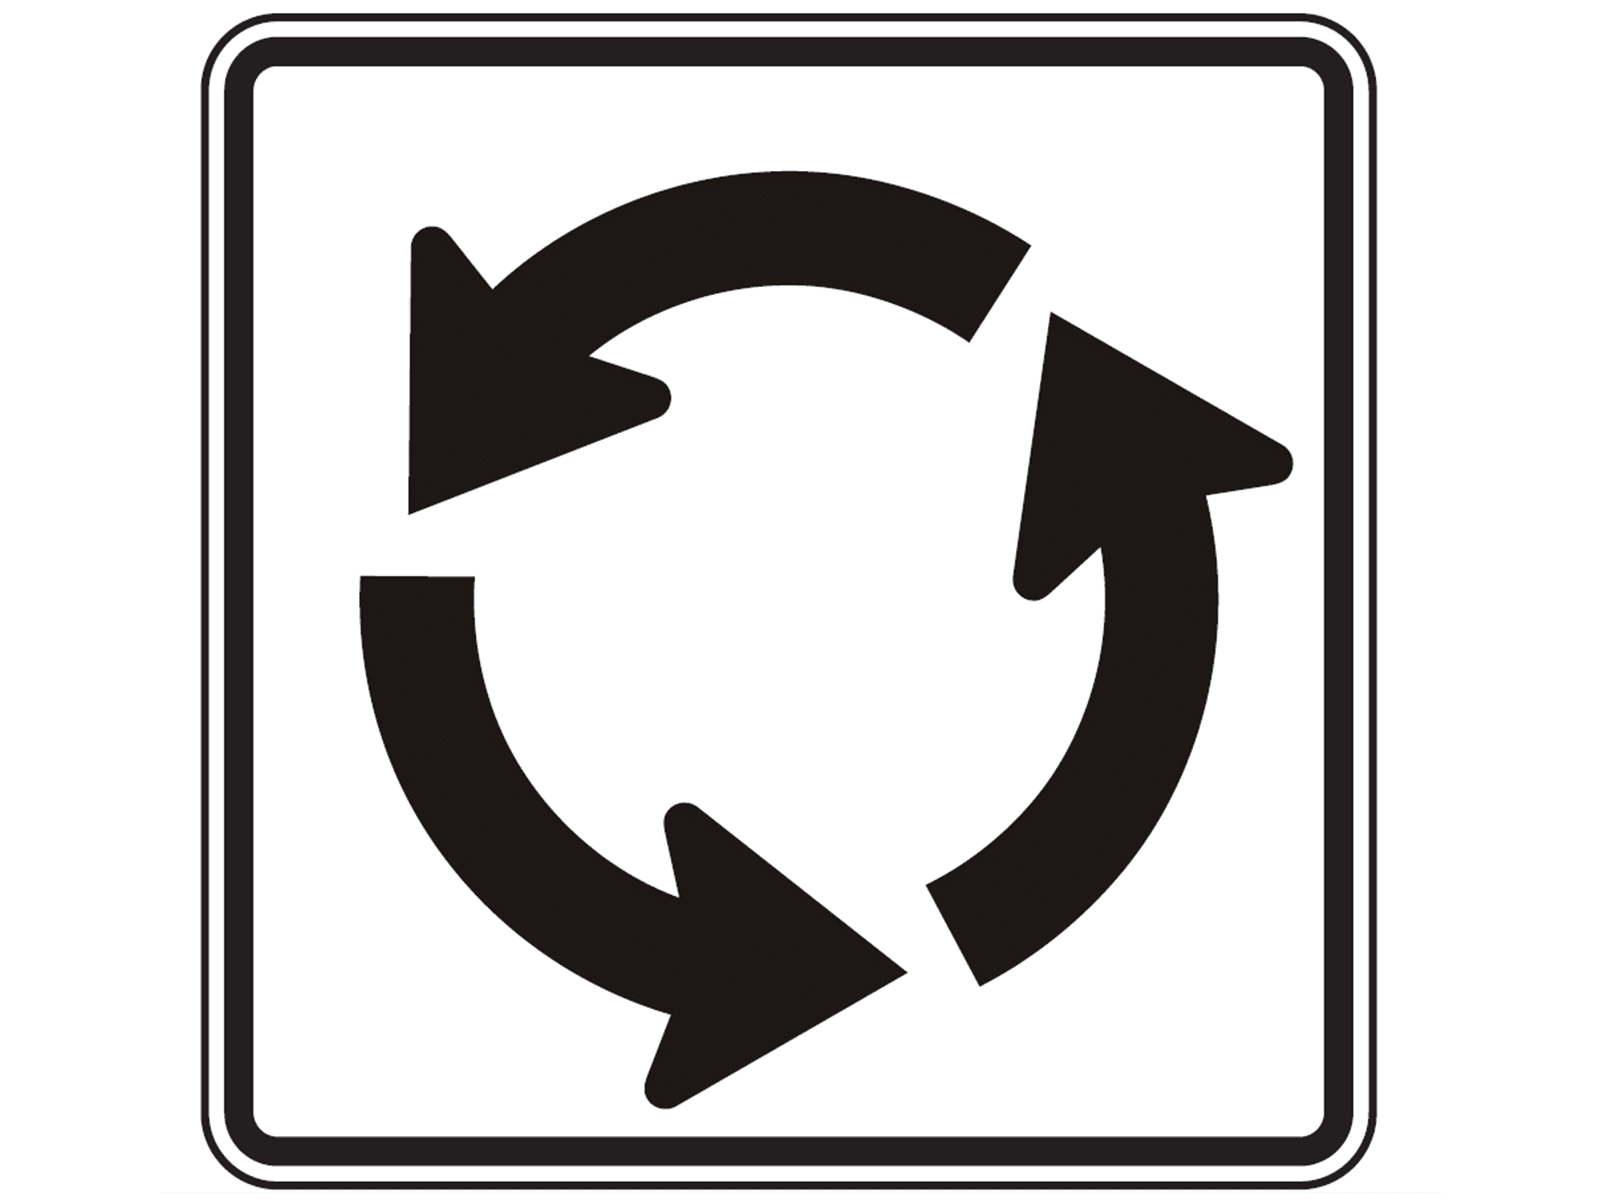 Roundabout R6-5P - R6: One Way and Divided Highway